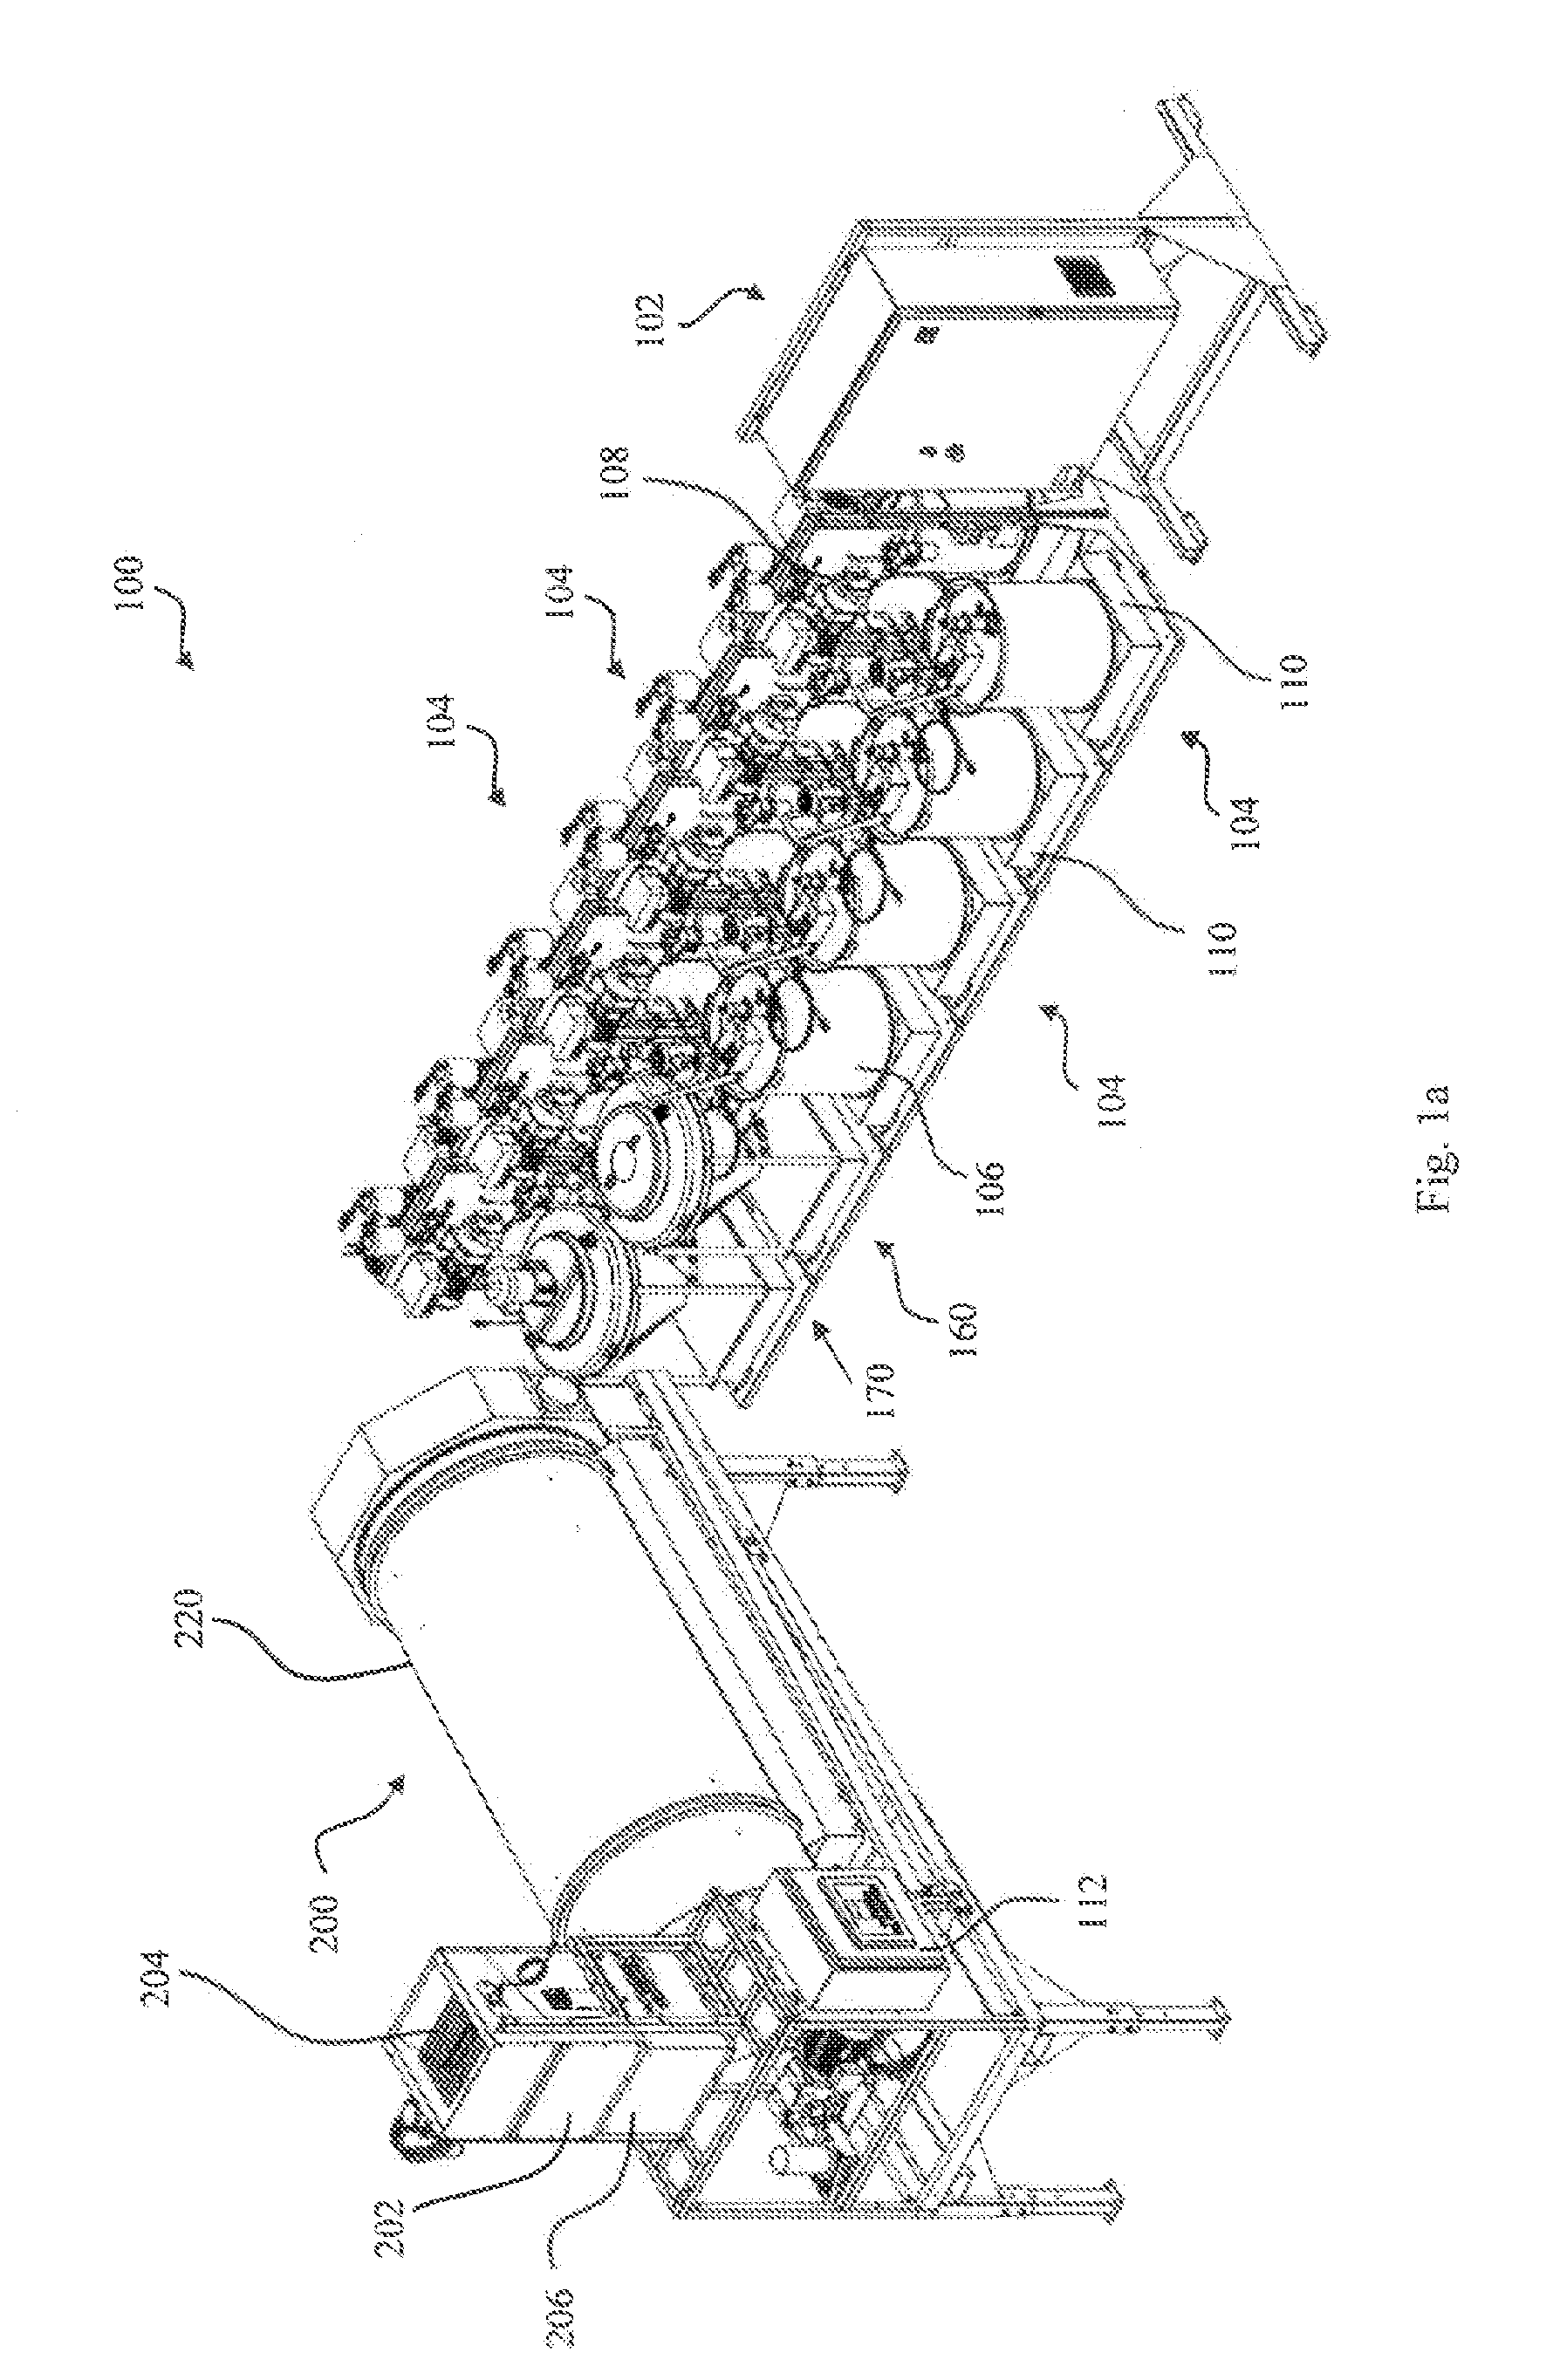 Seed treatment facilities, methods, and apparatus